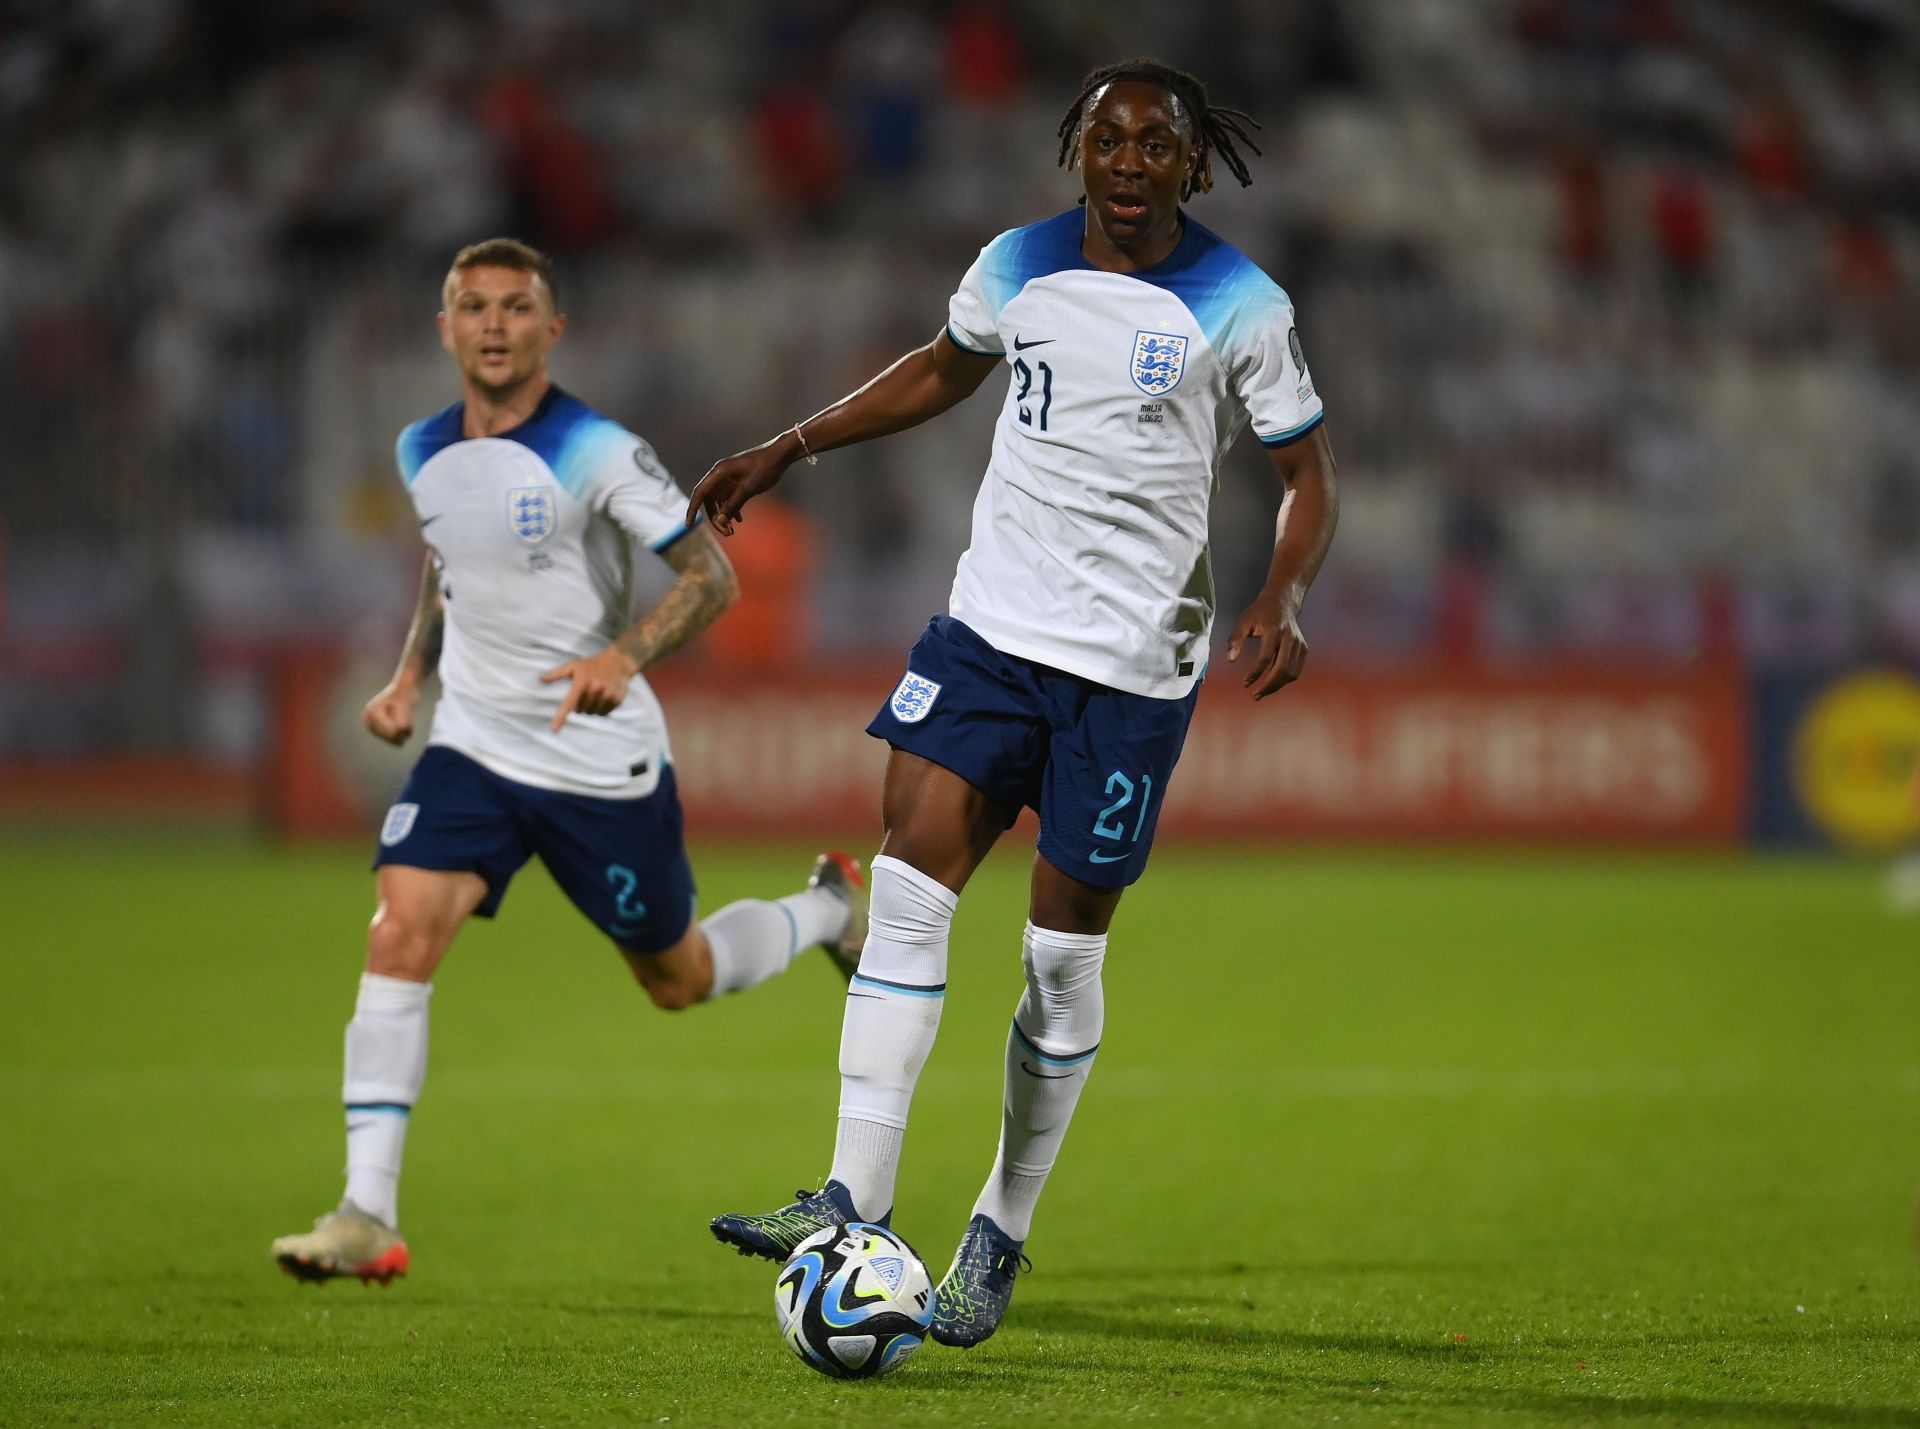 The Manchester United target made his England debut against Malta.